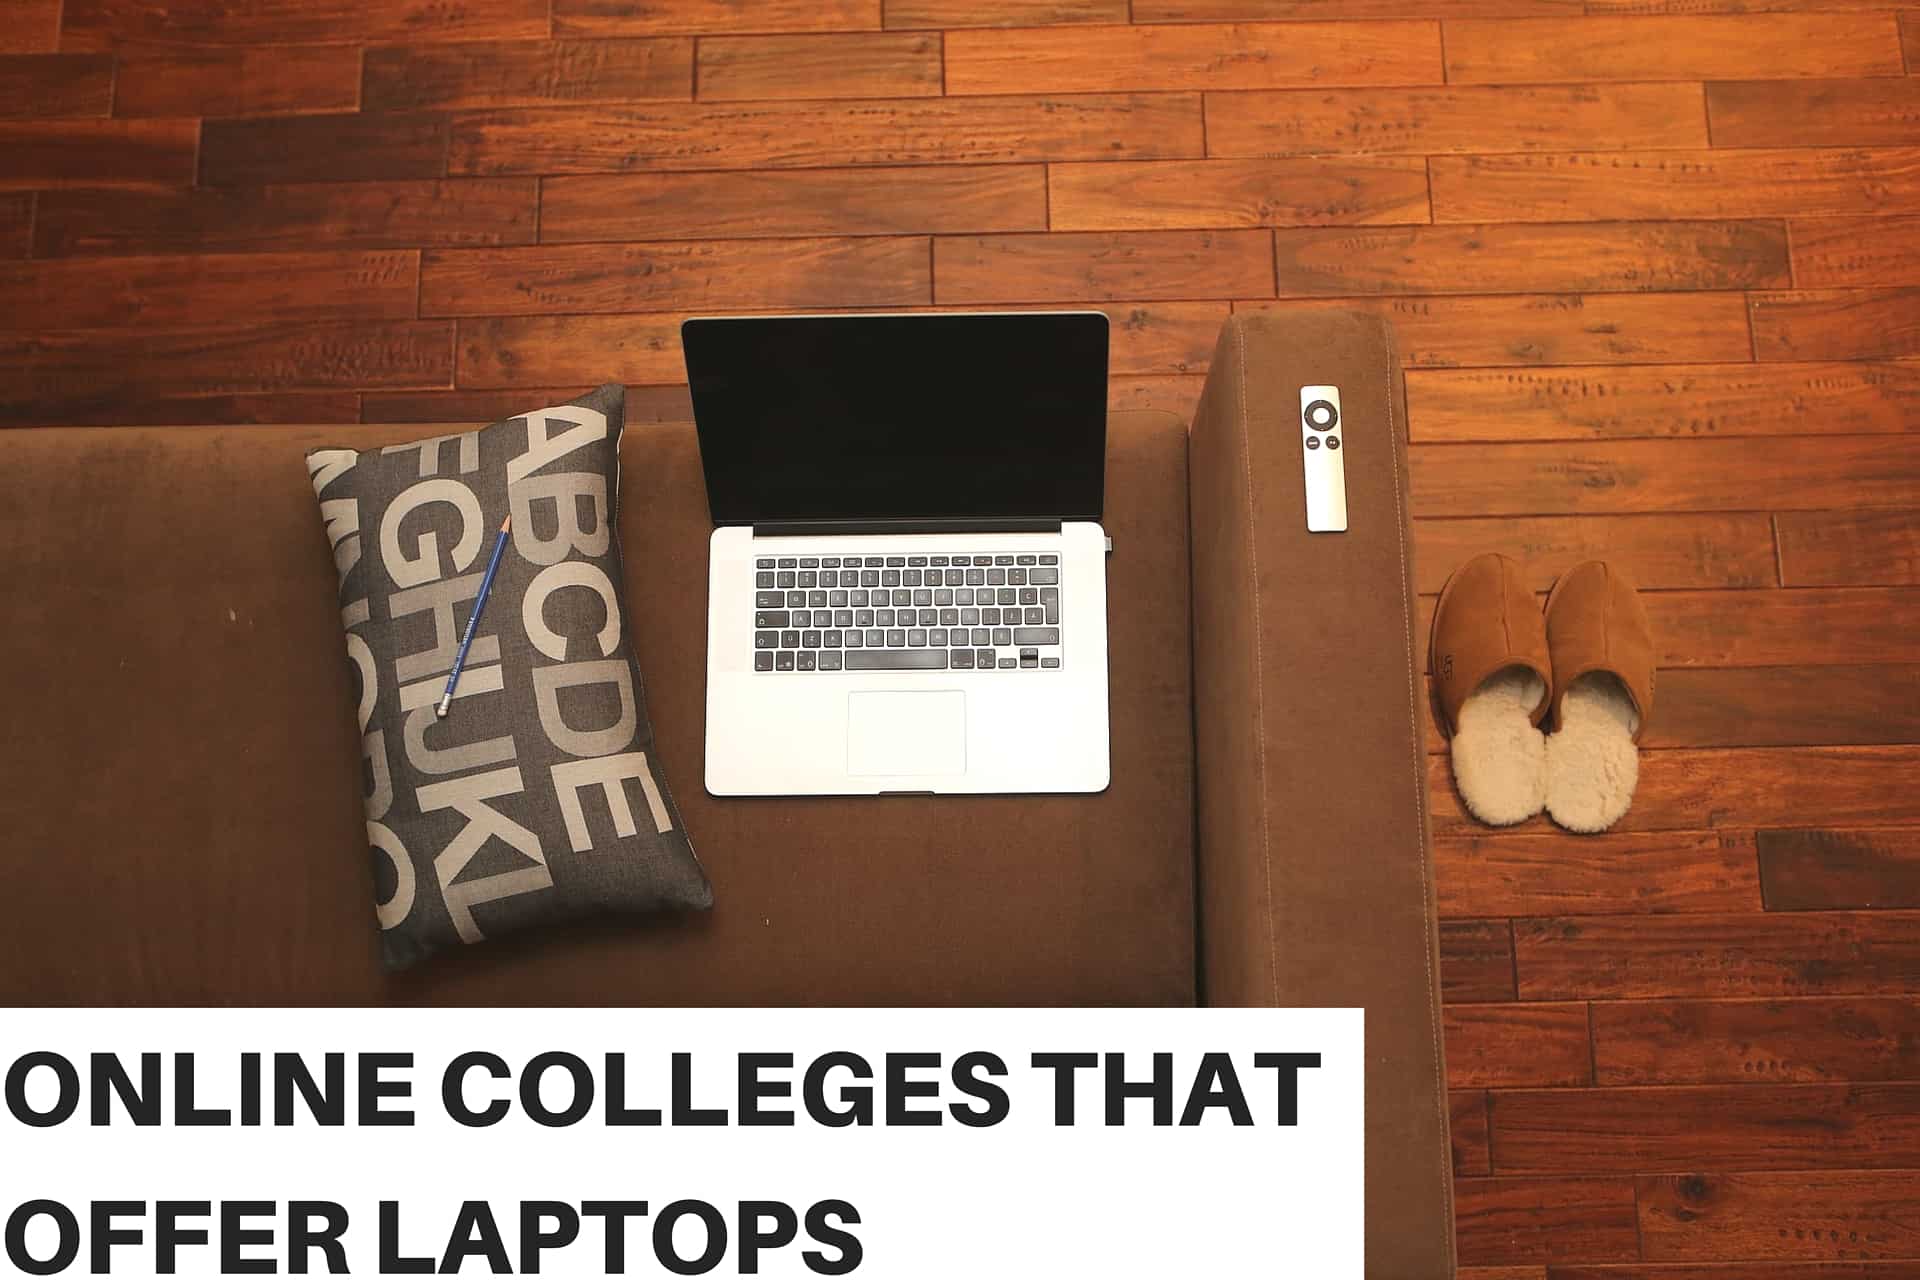  Online Colleges Offering Free Laptops